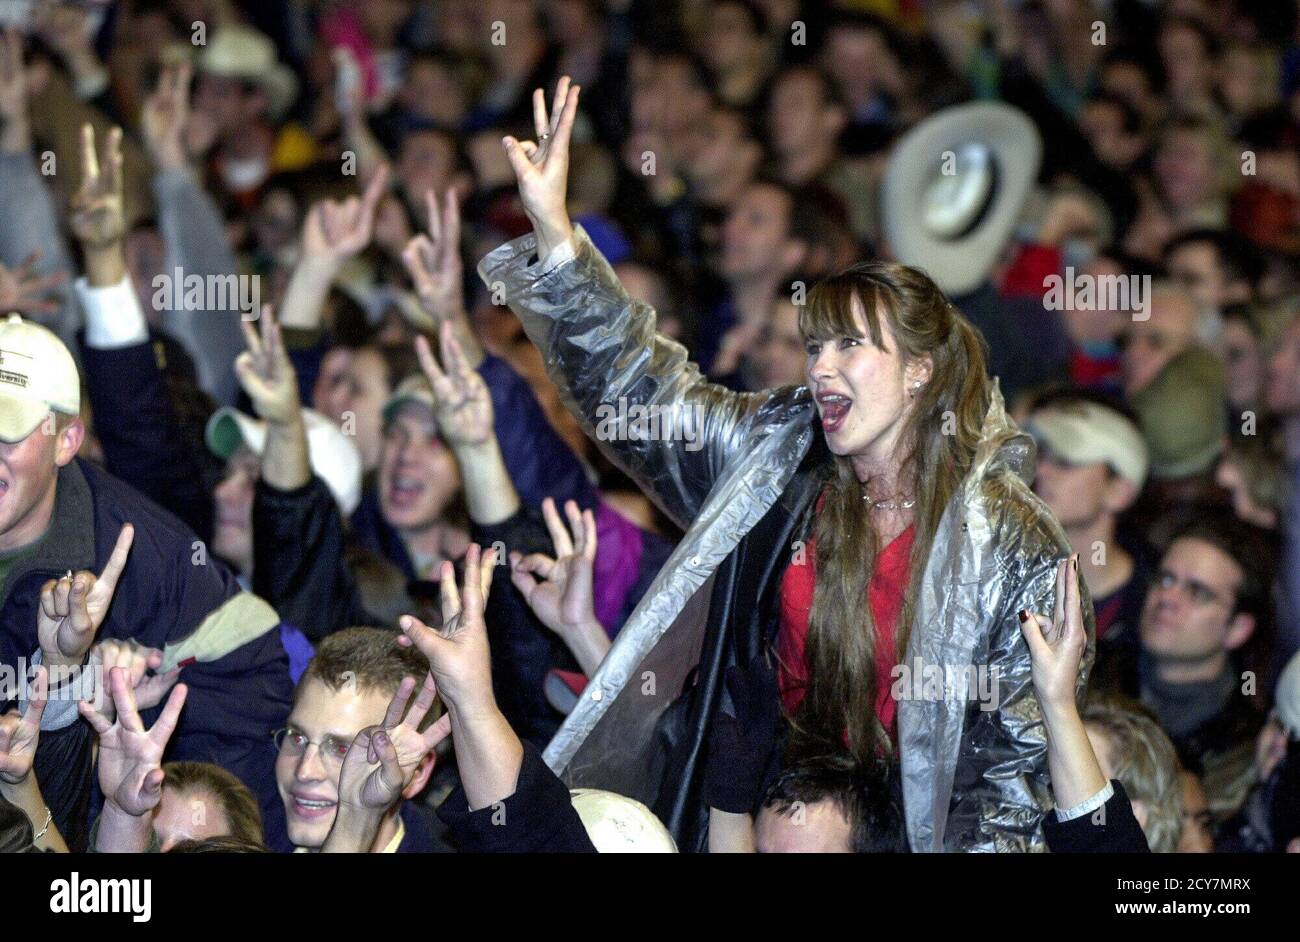 Austin, Texas 08NOV00:  Rowdy crowd in downtown Austin, Texas at 11th and Congress celebrates Texas Governor George W. Bush's early lead in the U.S. presidential race. The race was too close to call early Wednesday.  Photo by Bob Daemmrich/  2000 Stock Photo